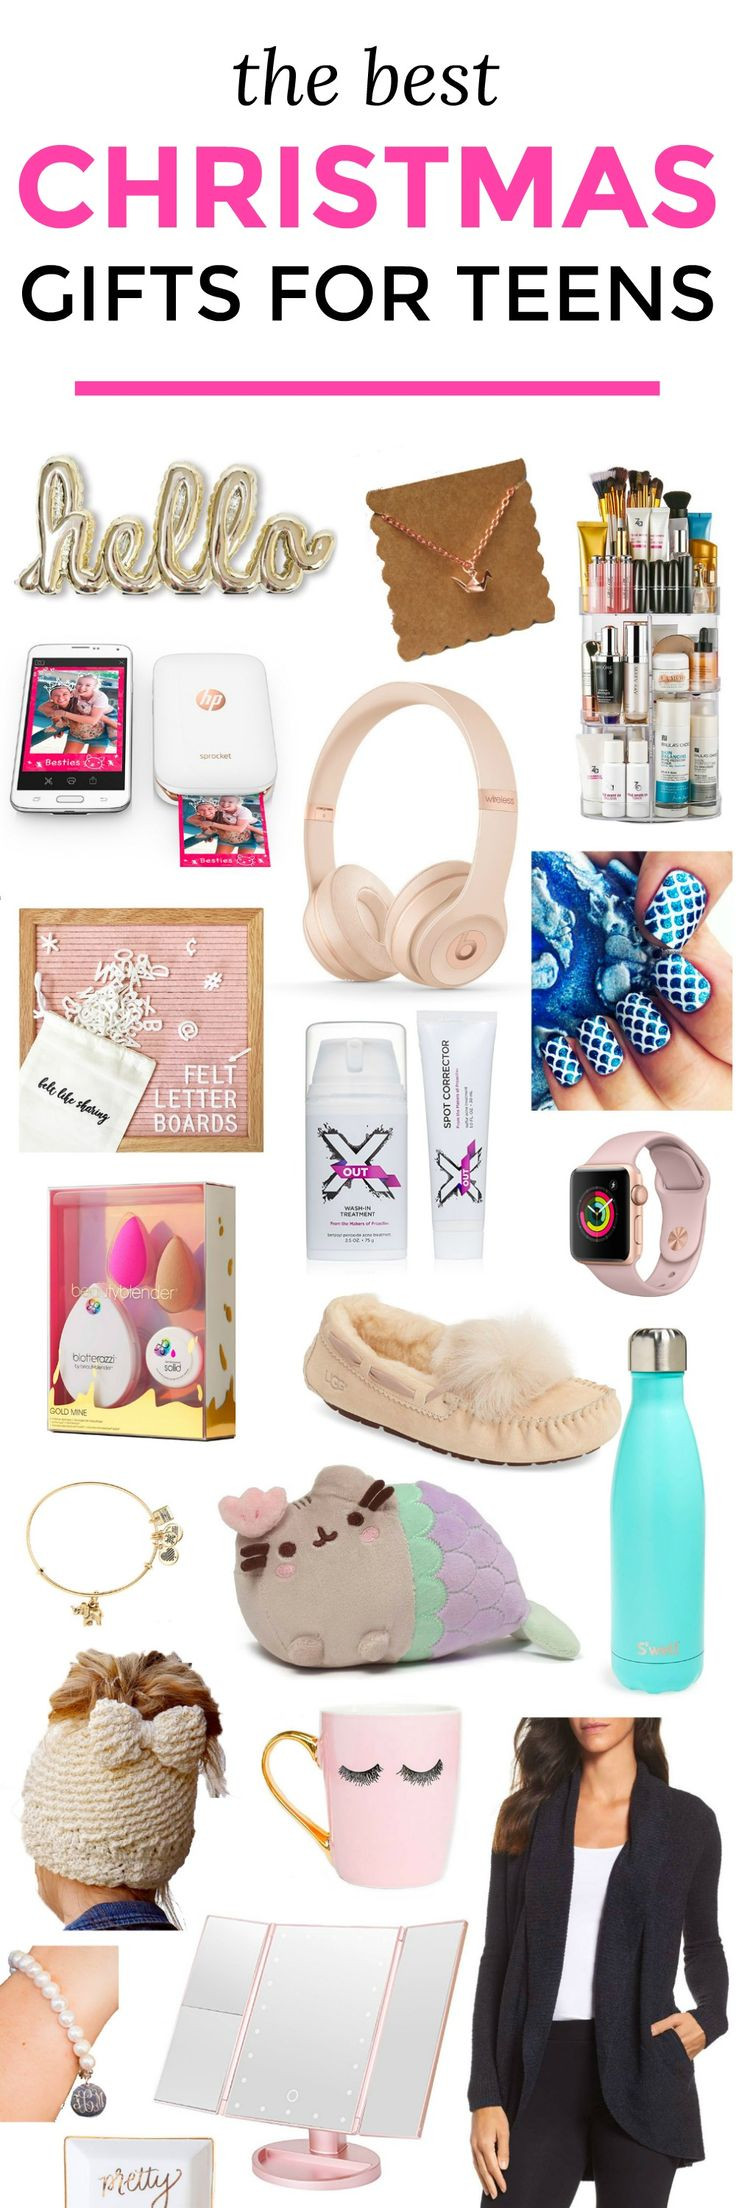 Unique Gift Ideas For Girls
 25 unique Teenage girl ts ideas on Pinterest